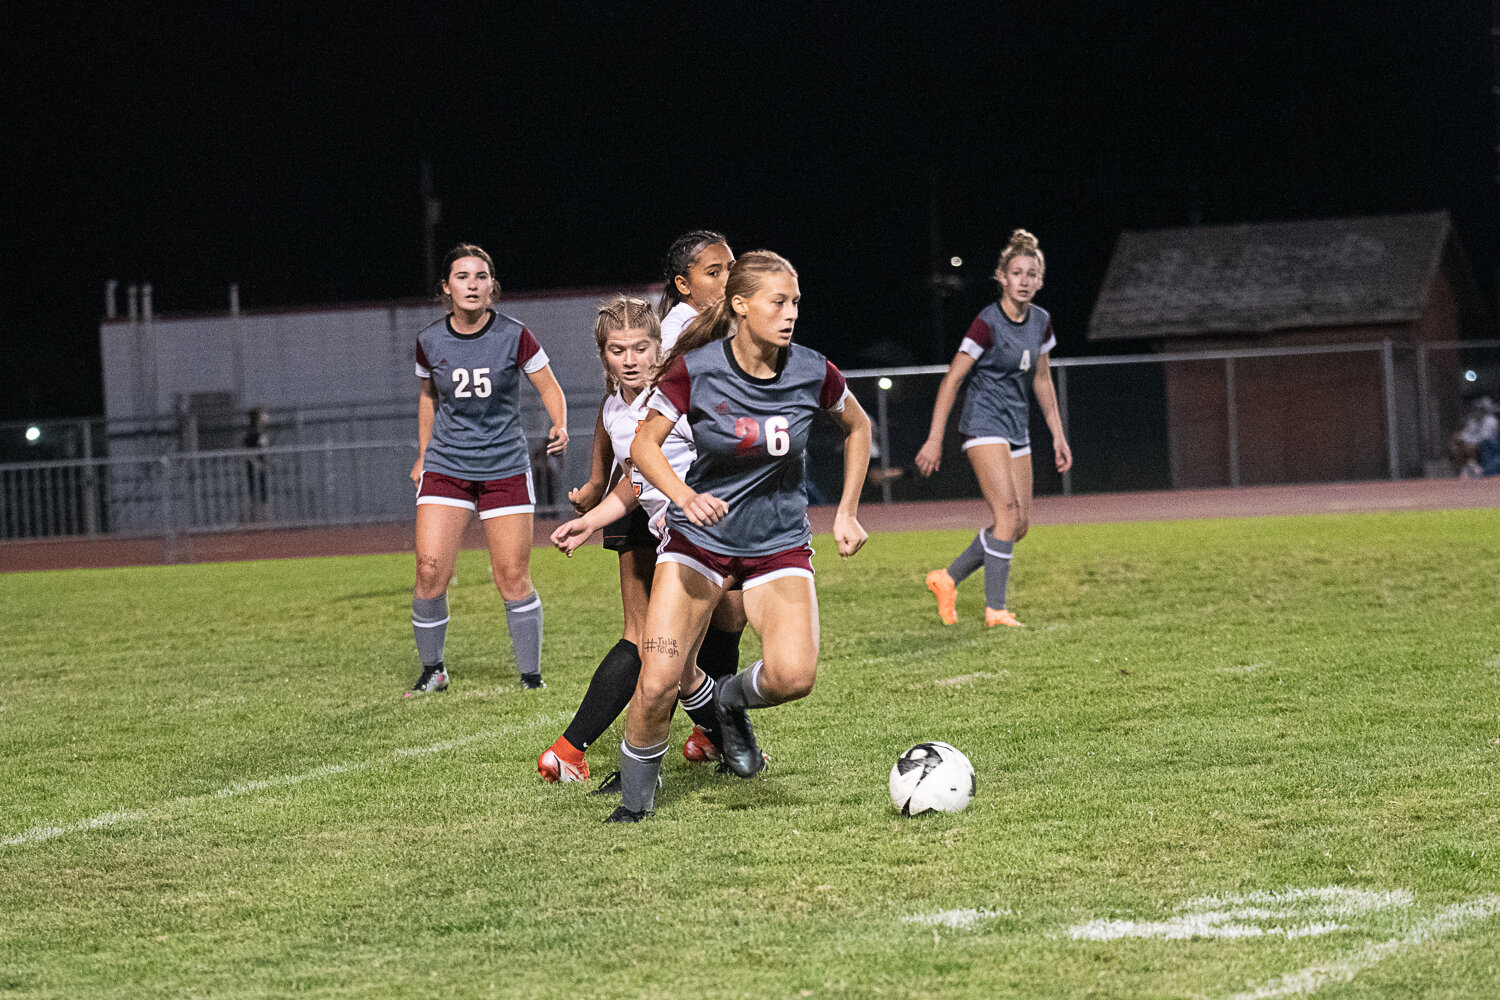 Elizabeth Mittge dribbles up field after splitting two defenders during W.F. West's loss to Centralia on Sept. 21.